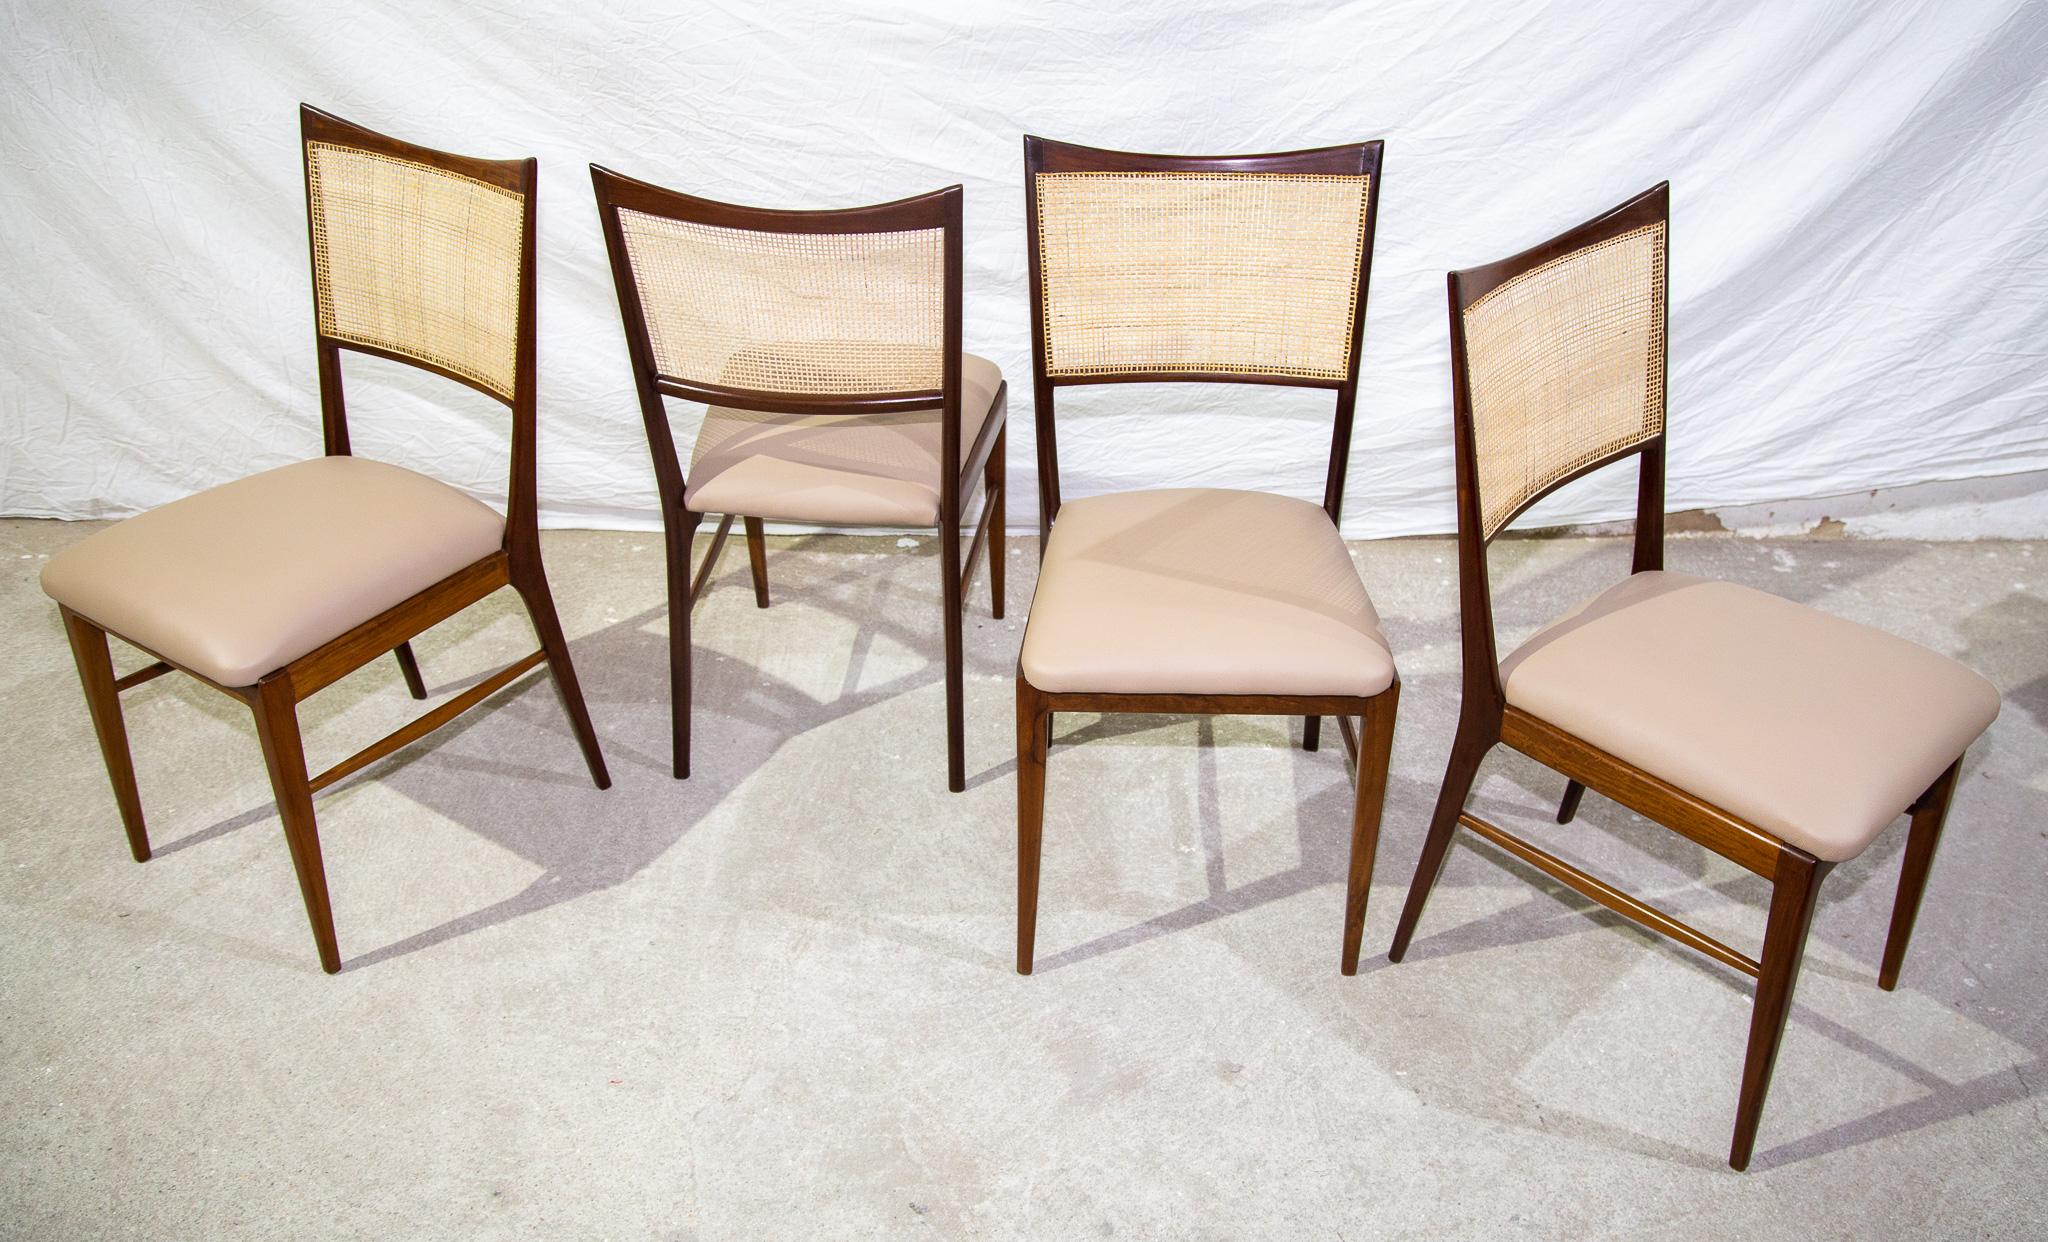 Brazilian Modern Set of Four Chairs in Hardwood & Beige Leather, Unknown, 1960s For Sale 3